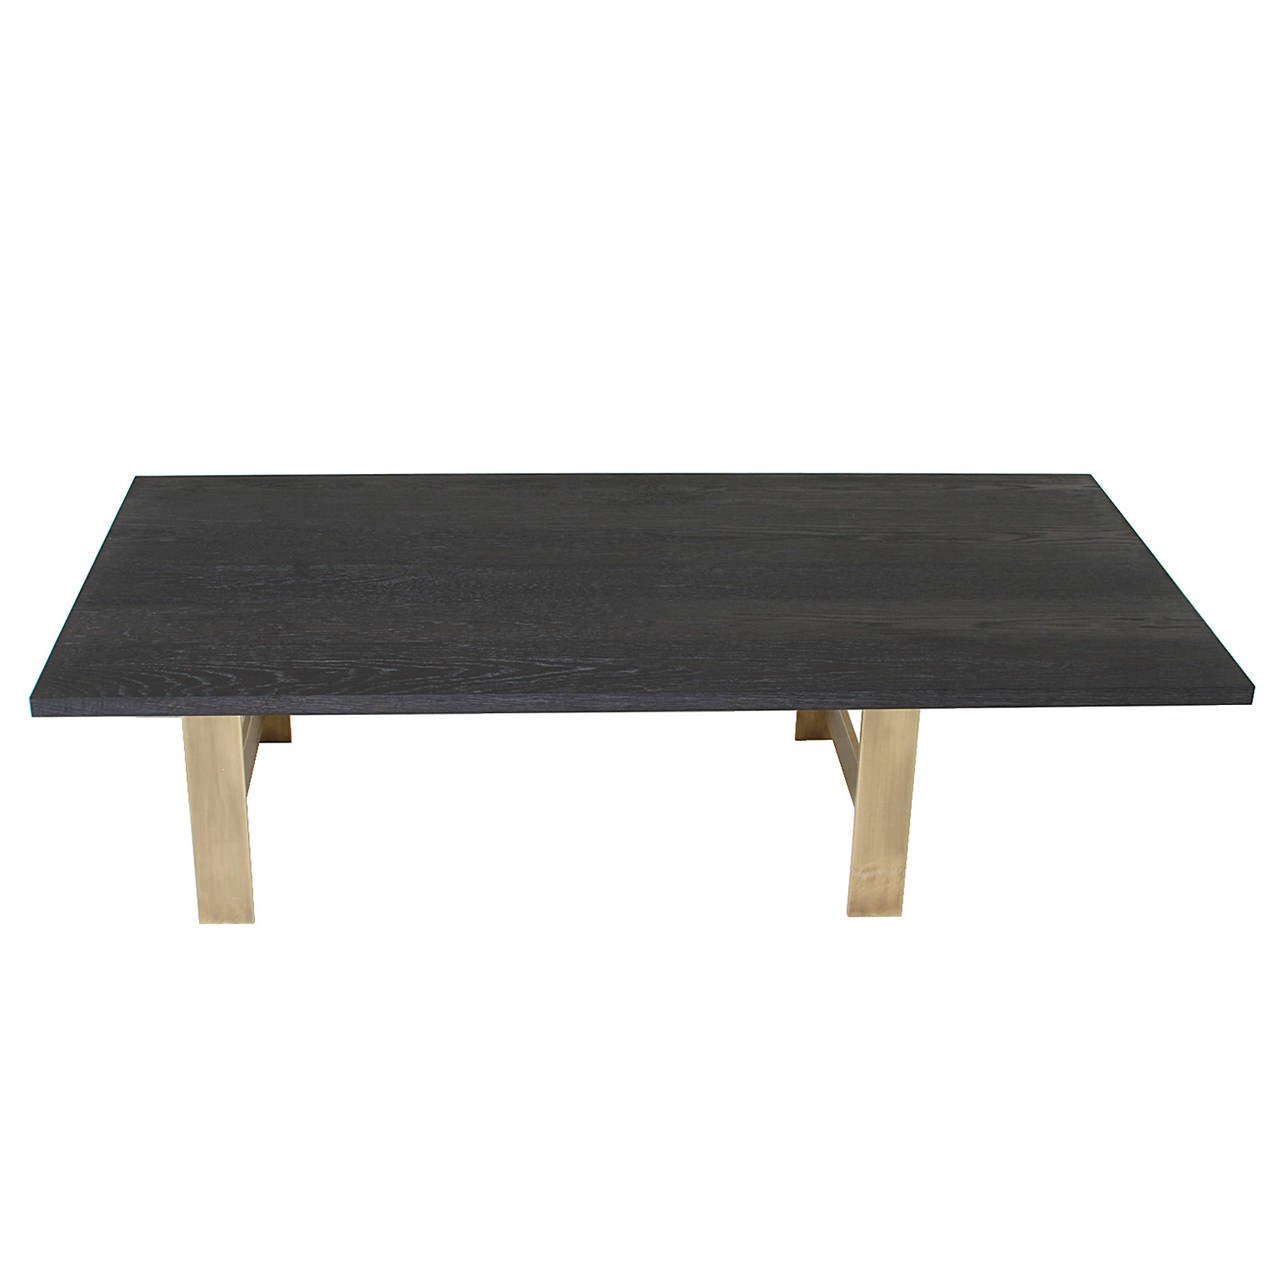 A custom stylish, asymmetrical coffee table by Thomas Hayes Studio featuring a Brass base and cantilevered ebonized and brushed solid Oak table top finished in Charcoal Oil.

This item is available for custom order and the lead time is 6-10 weeks;